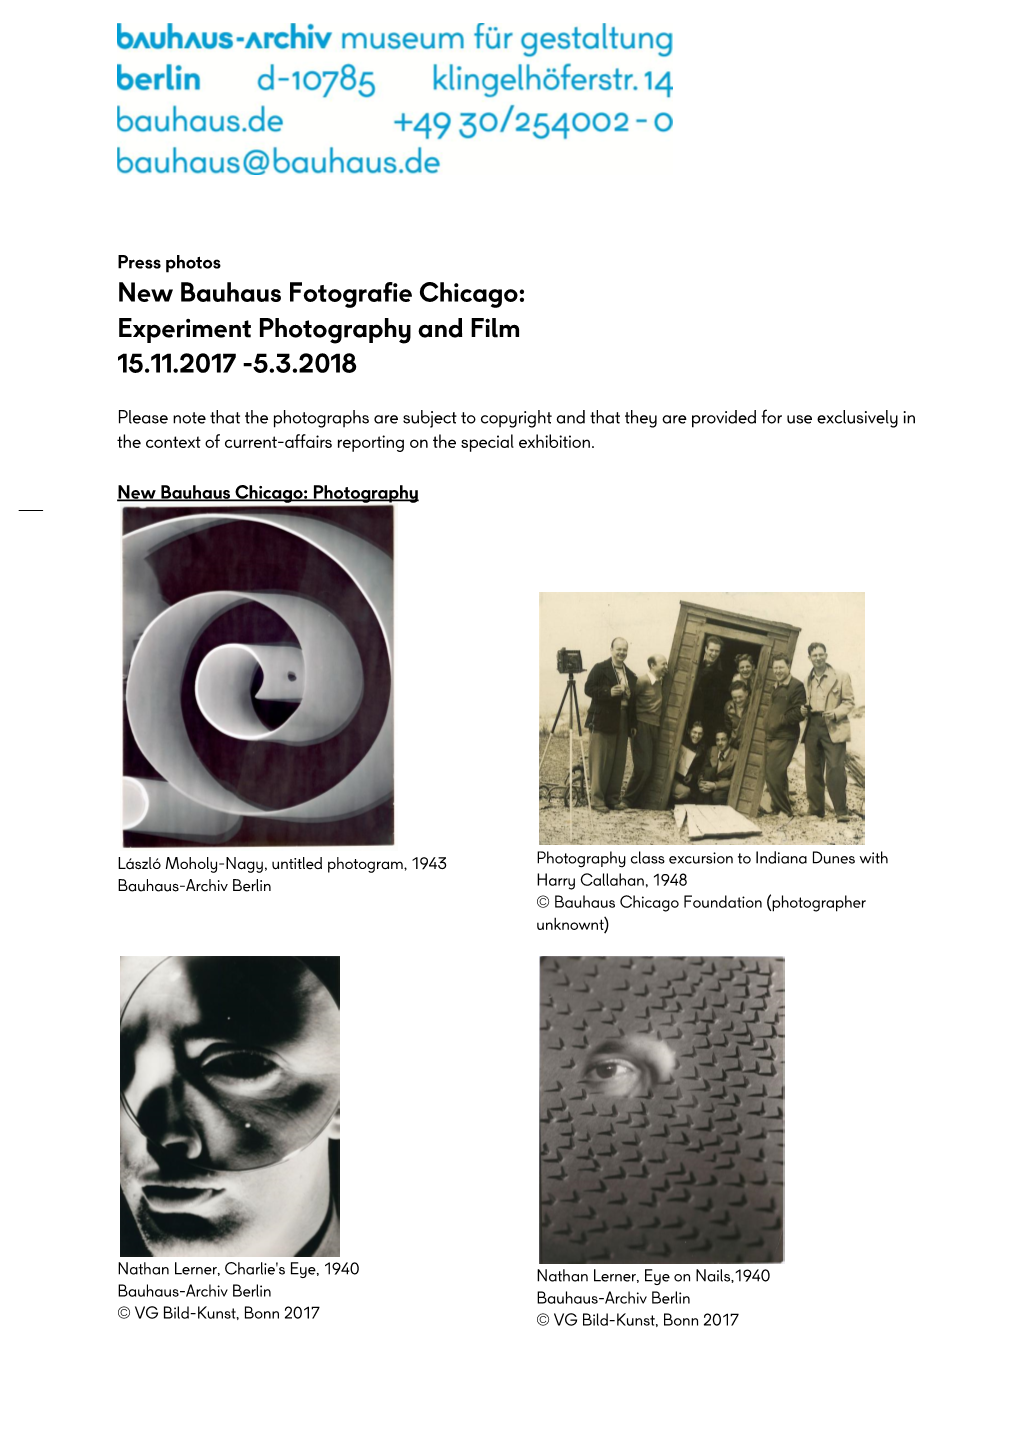 New Bauhaus Fotografie Chicago: Experiment Photography and Film